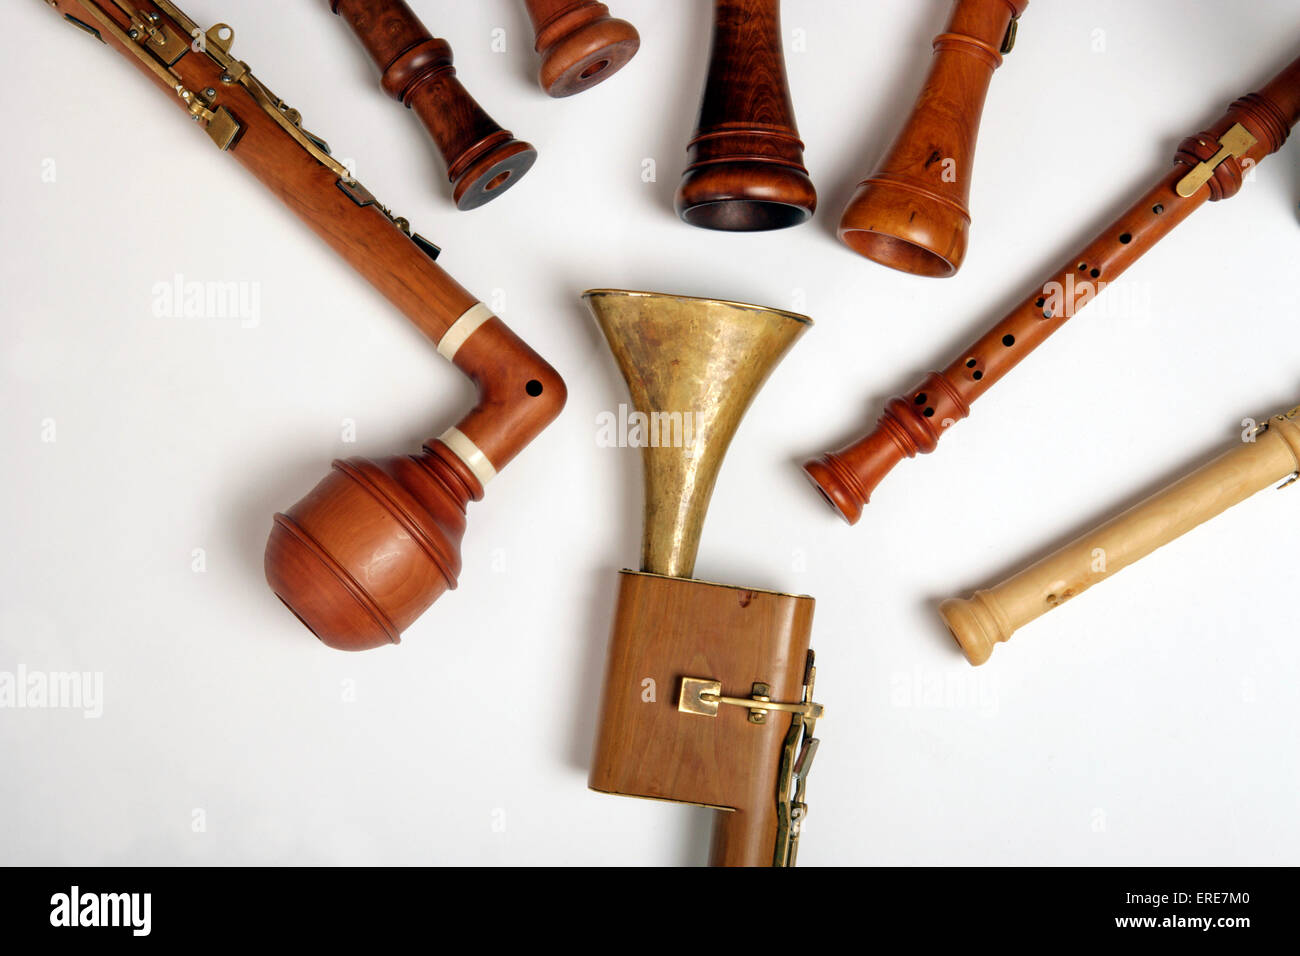 Collection of baroque and classical period woodwind instruments. Basset,  horn, basset clarinet, period clarinets, chalumeau Stock Photo - Alamy